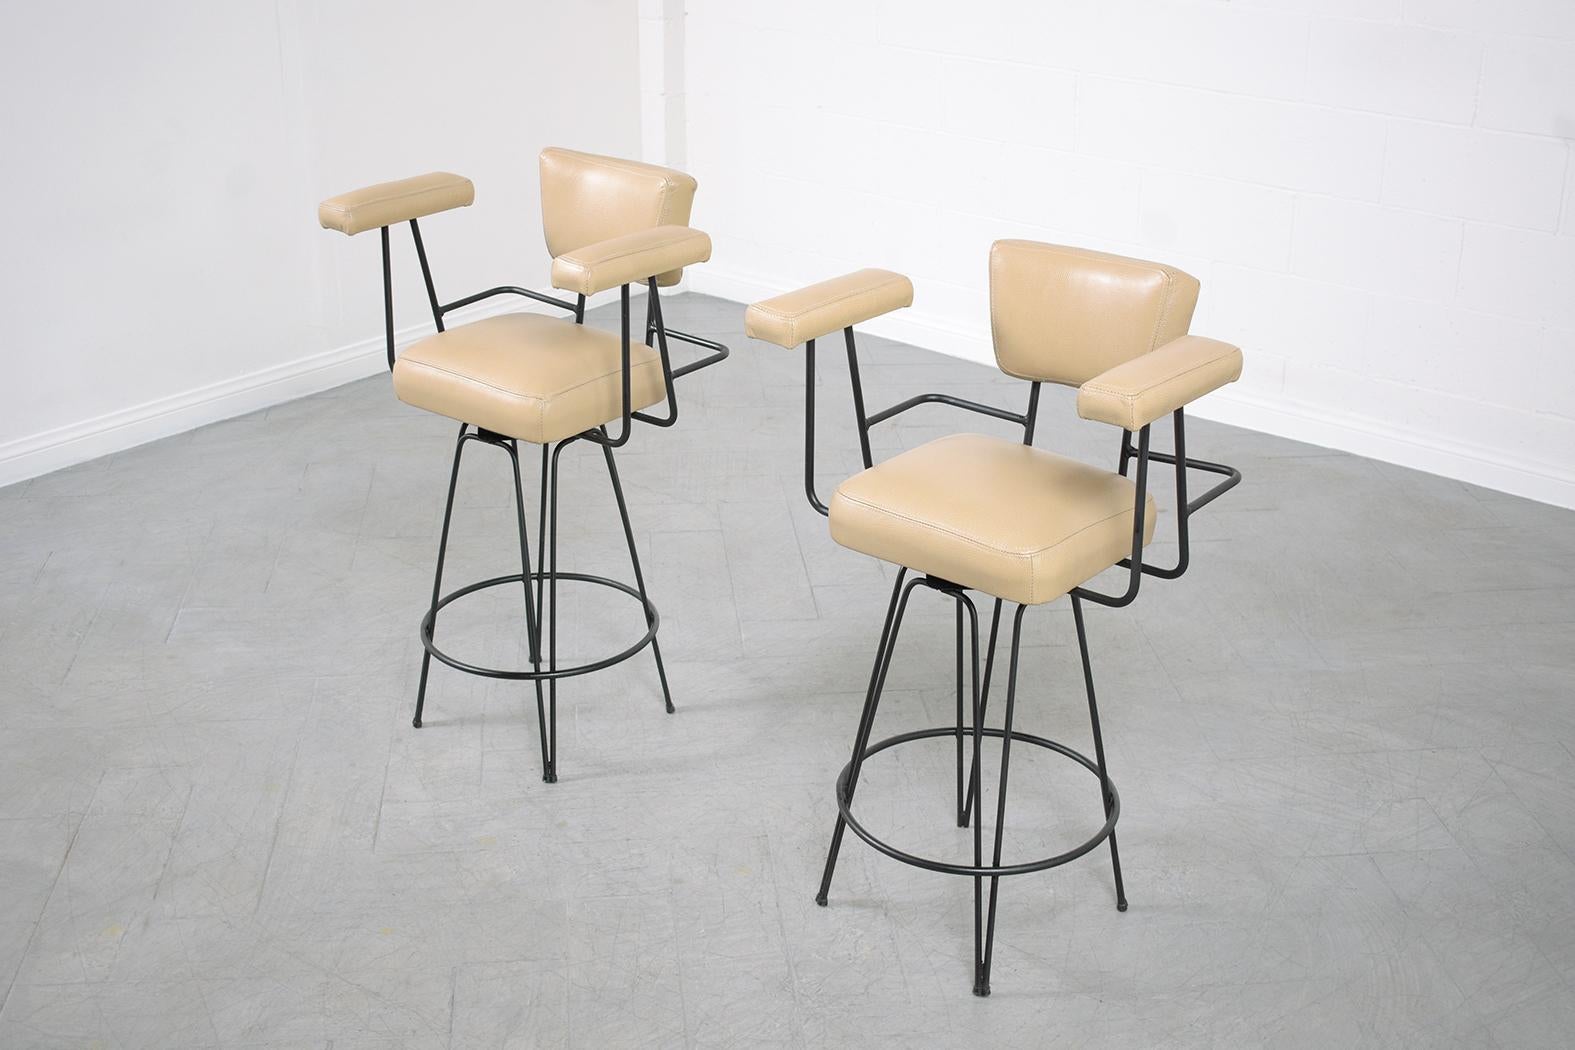 Restored 1970s Mid-Century Modern Swivel Barstools in Beige Leather In Good Condition For Sale In Los Angeles, CA